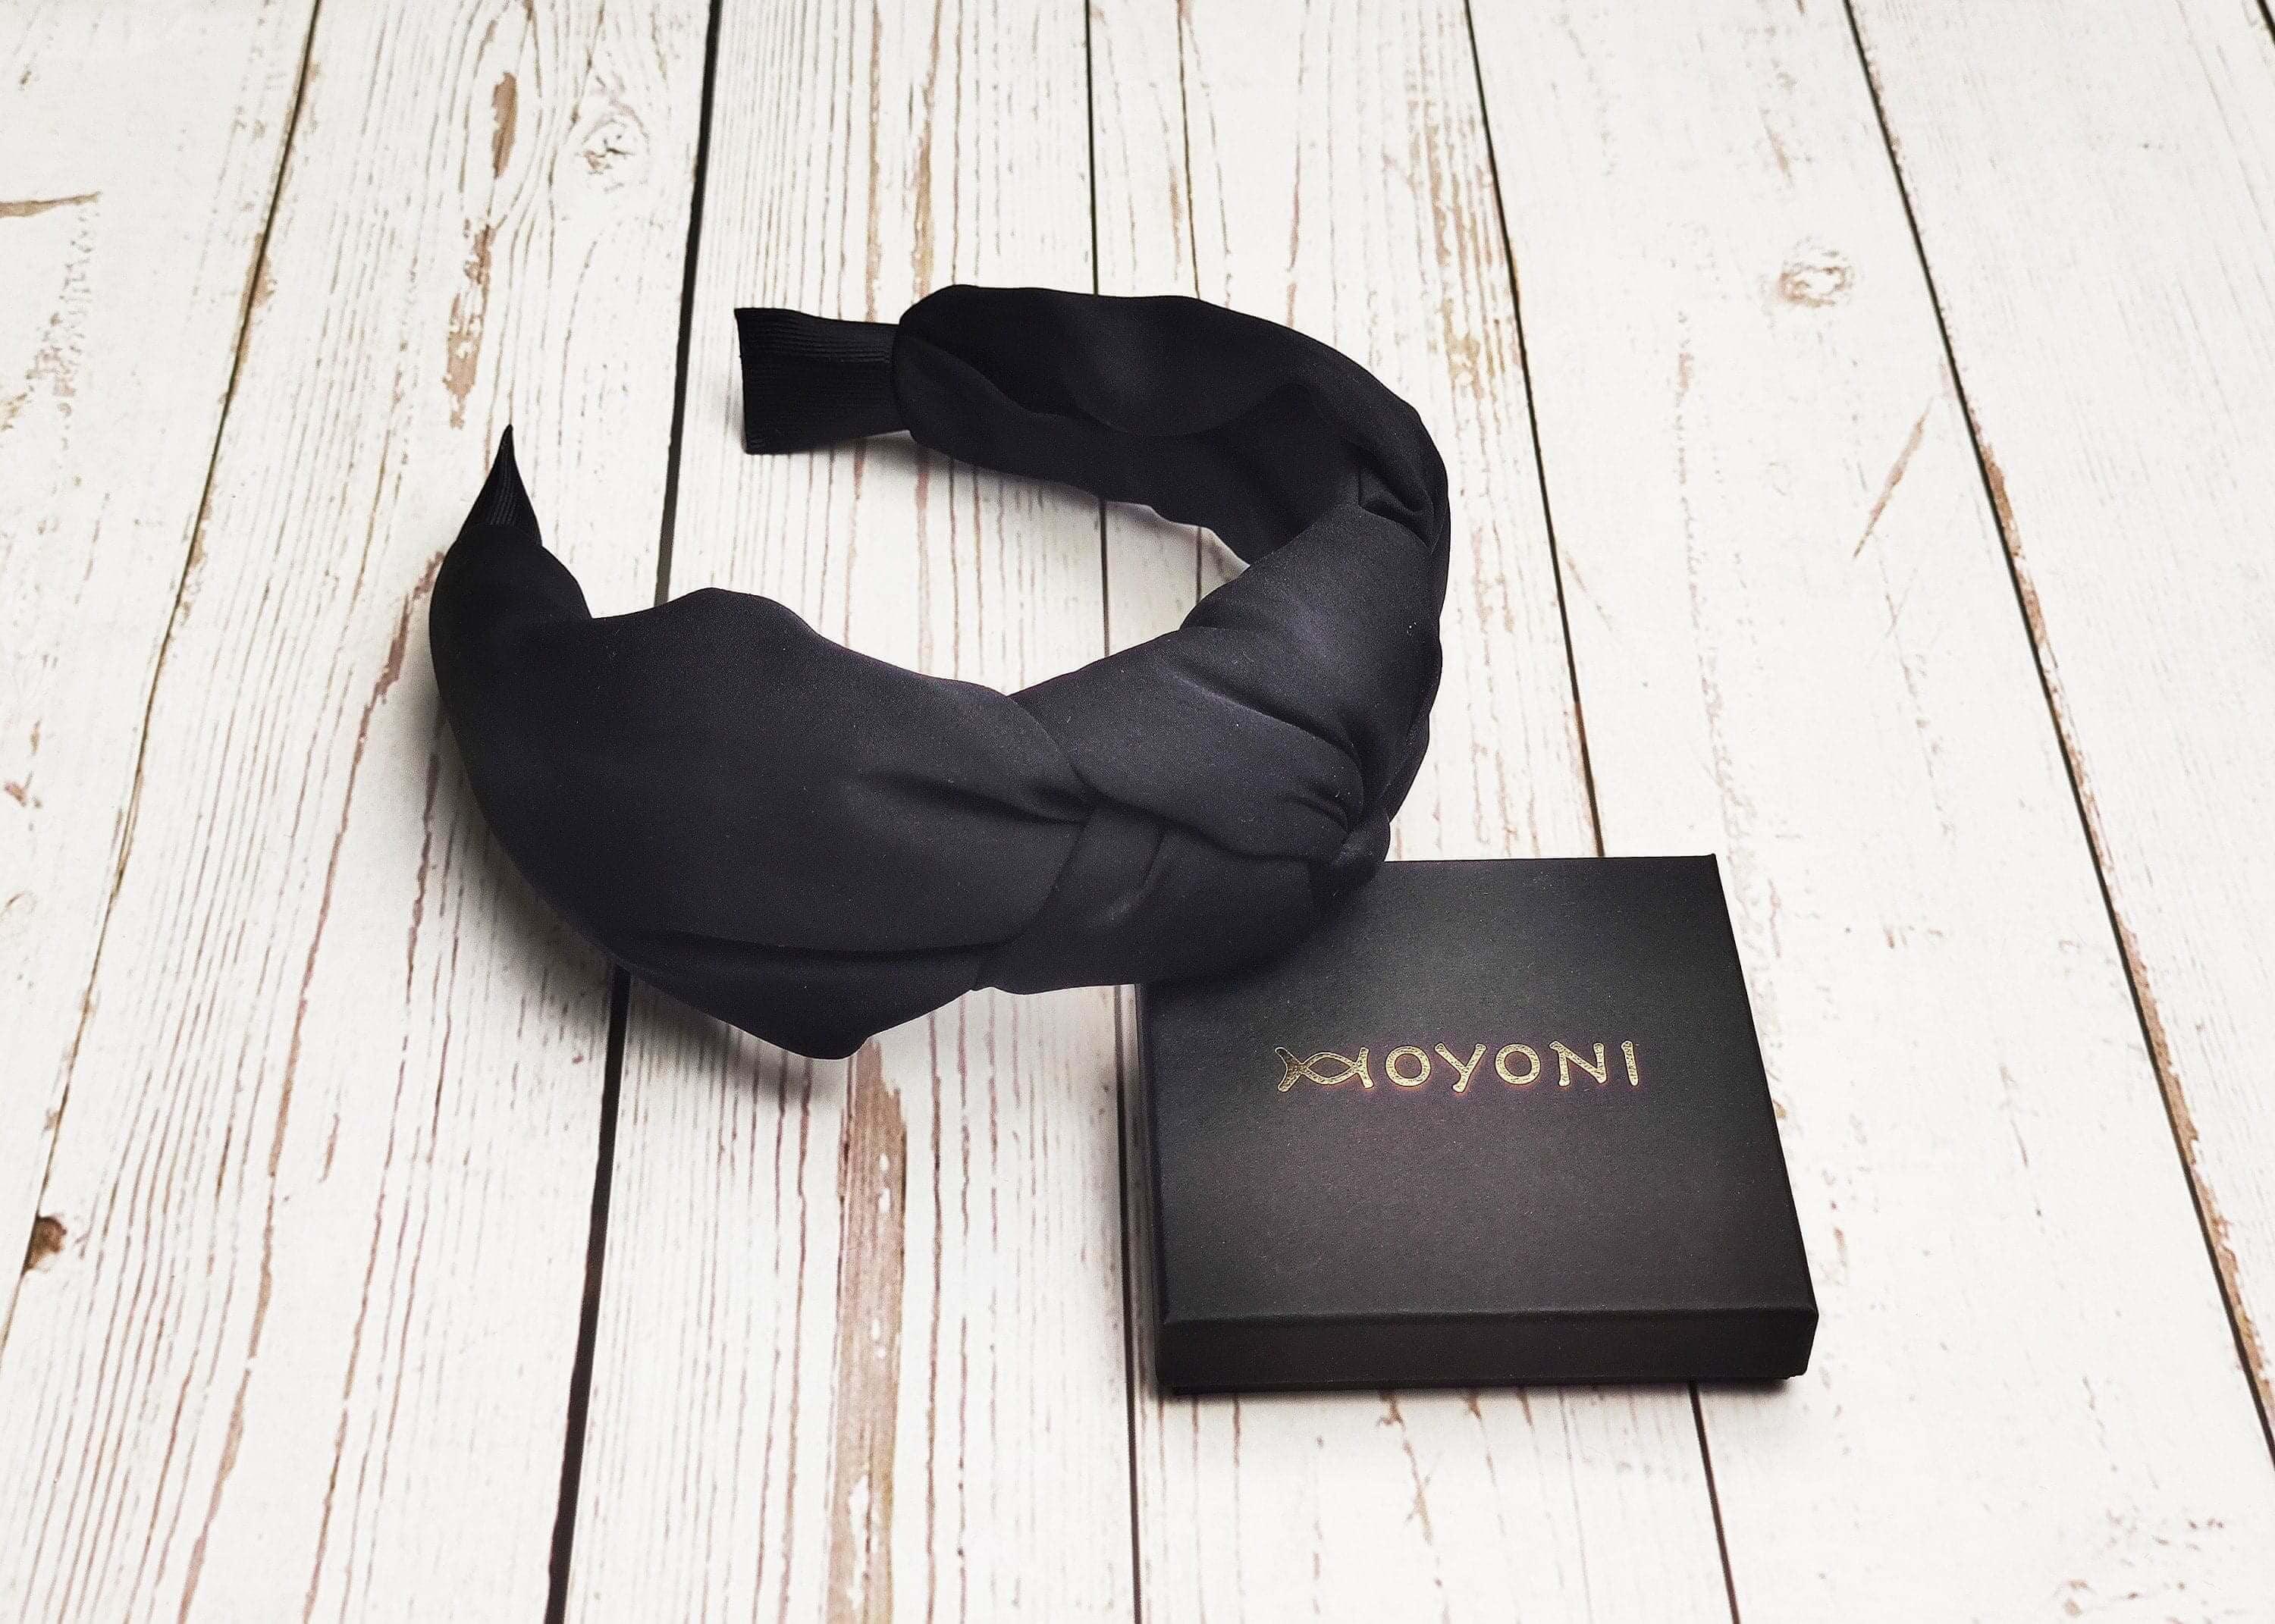 Premium Black Knotted Twist Padded Wide Headband, Dark Color Fashionable Viscose Crepe Hair Accessory available at Moyoni Design